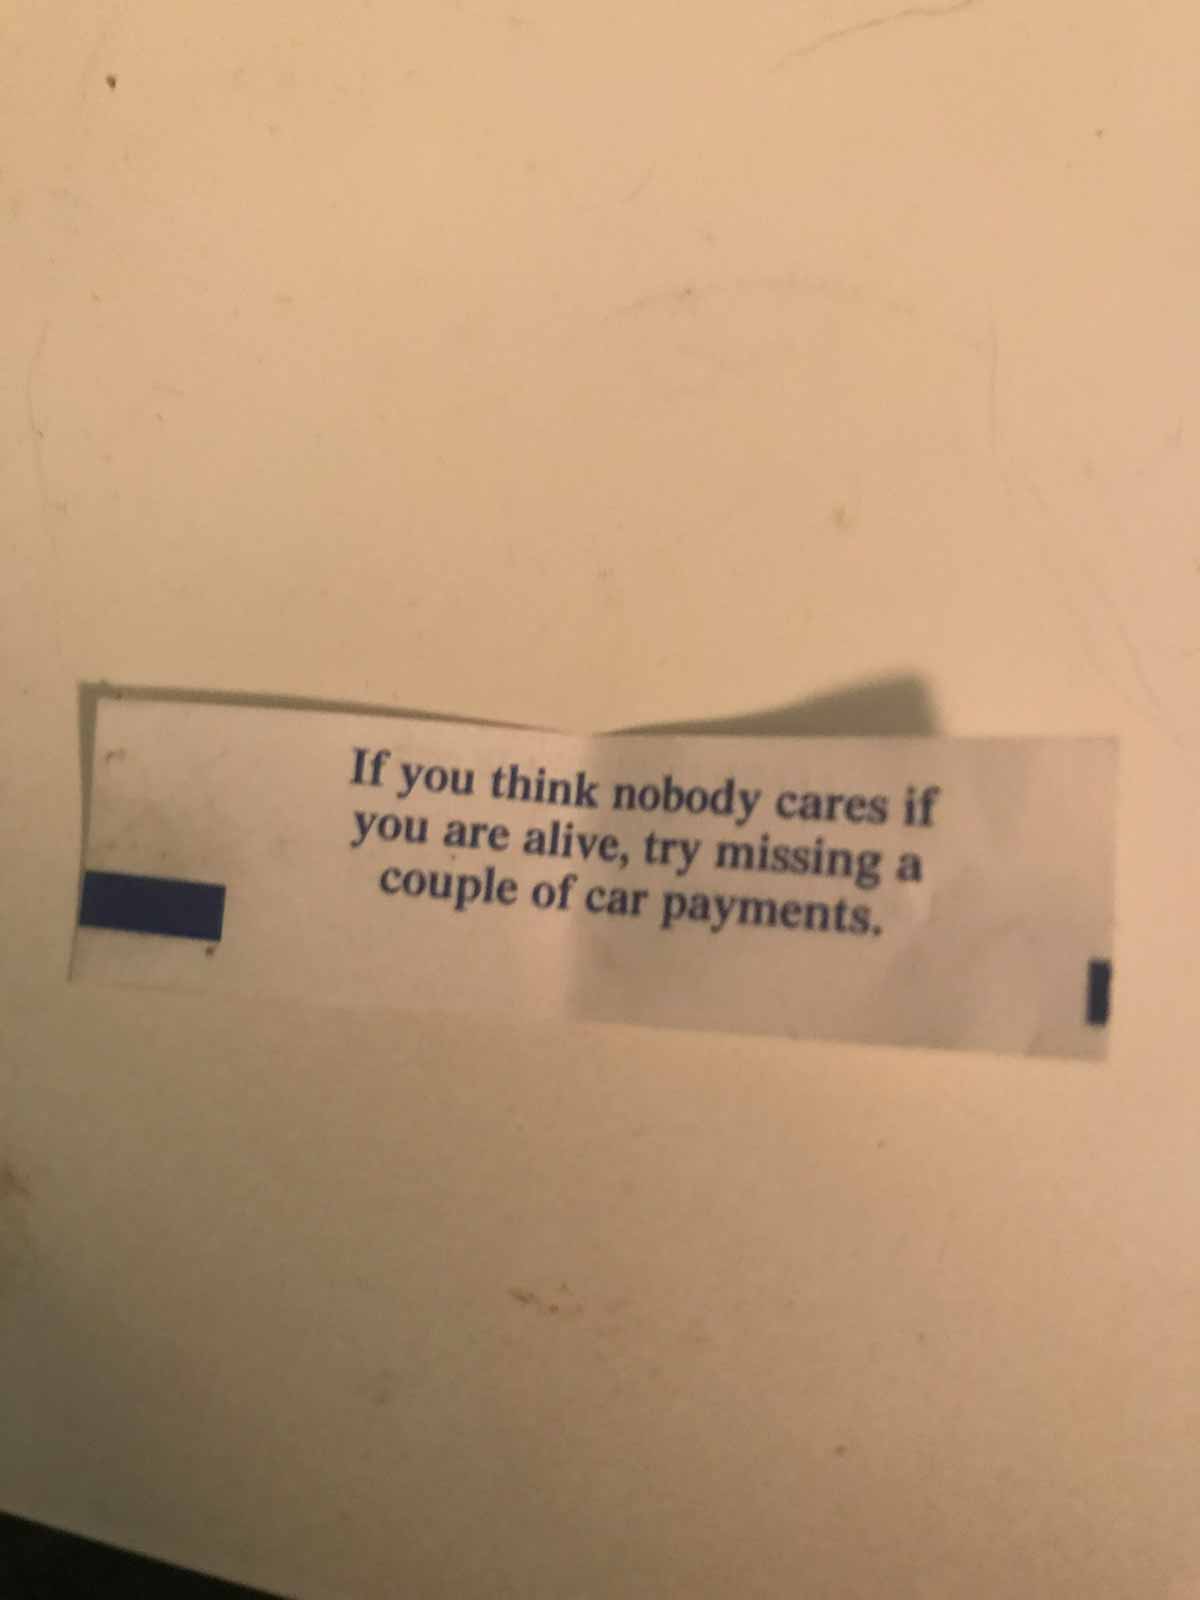 Funny fortune cookie that says 'if you think nobody cares if you are alive, try missing a couple of car payments'